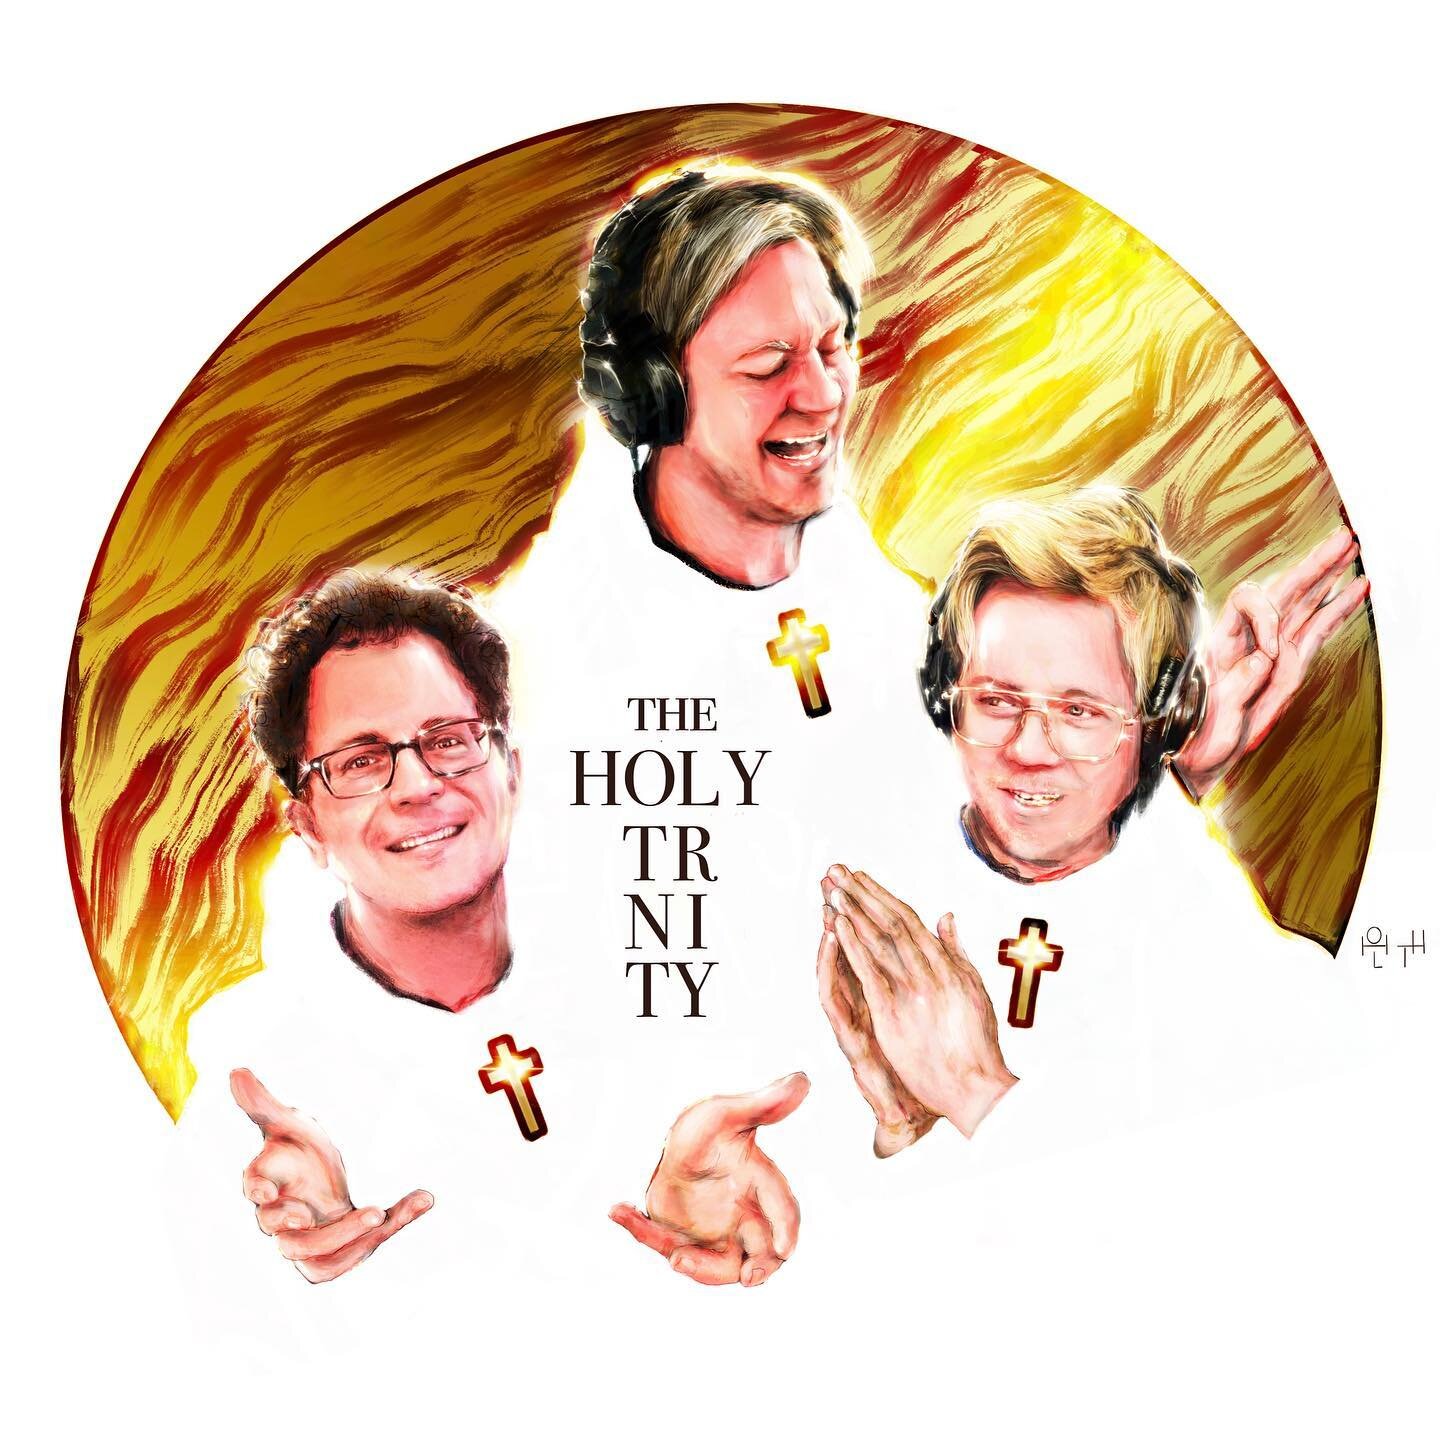 Update: It says TRNITY... that&rsquo;s uuuh what they&rsquo;re calling themselves now. A lot of people are saying it. Fun. Laughter. Meeting. Columbia Pictures presents #theholytrinity #officehourslive #timheidecker #djdougpound #vicberger #ohl #post